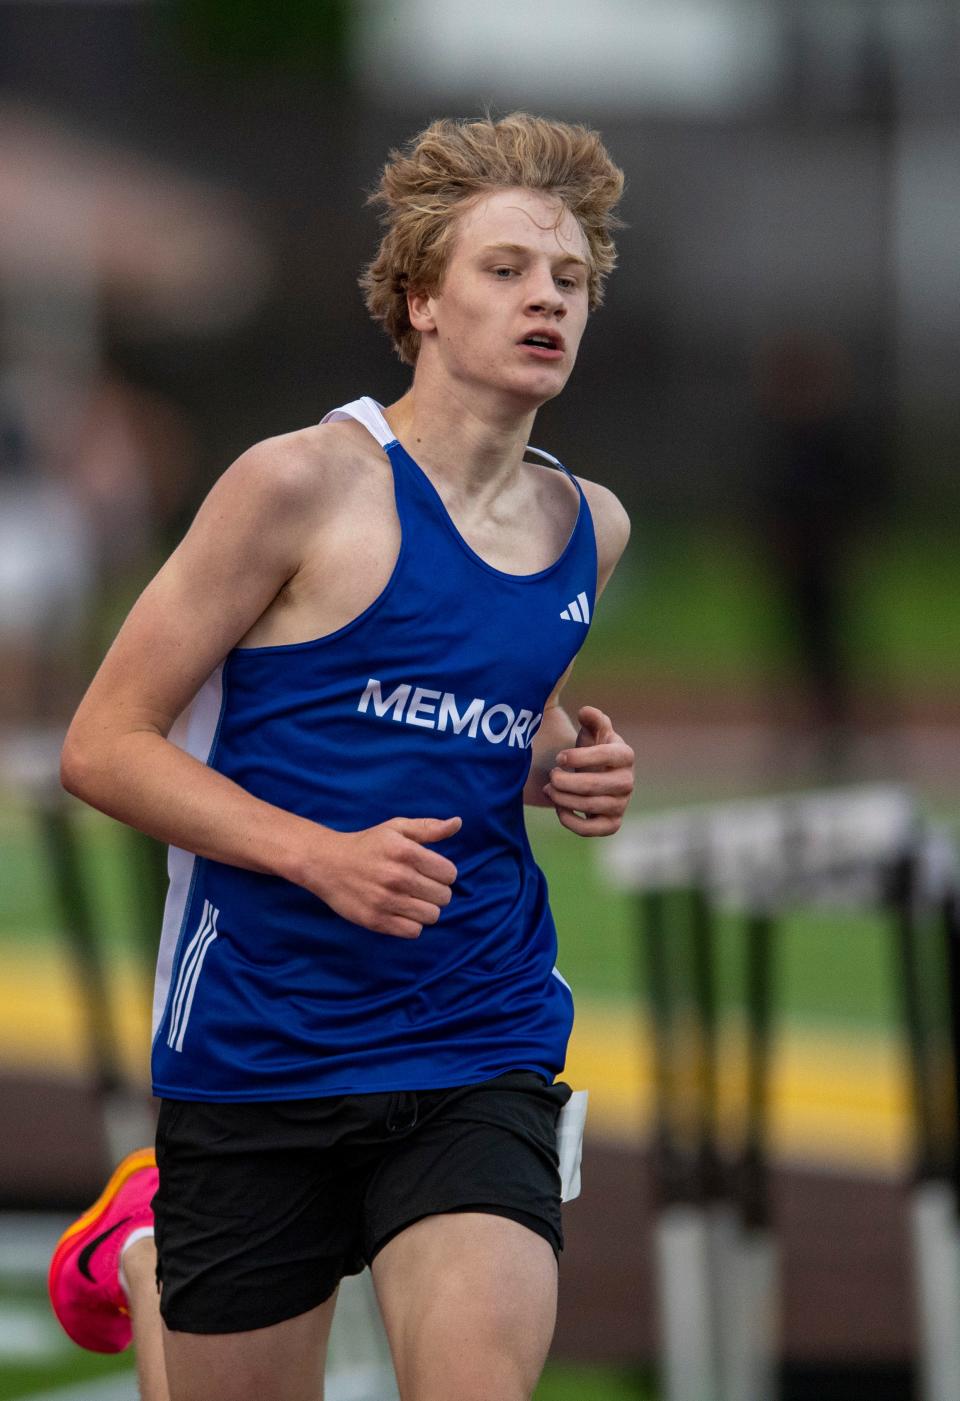 Memorial’s Andrew Foster leads in the 1600 meter run during the 2024 IHSAA Boys Track & Field Sectional 32 at Central High School Thursday, May 16, 2024.